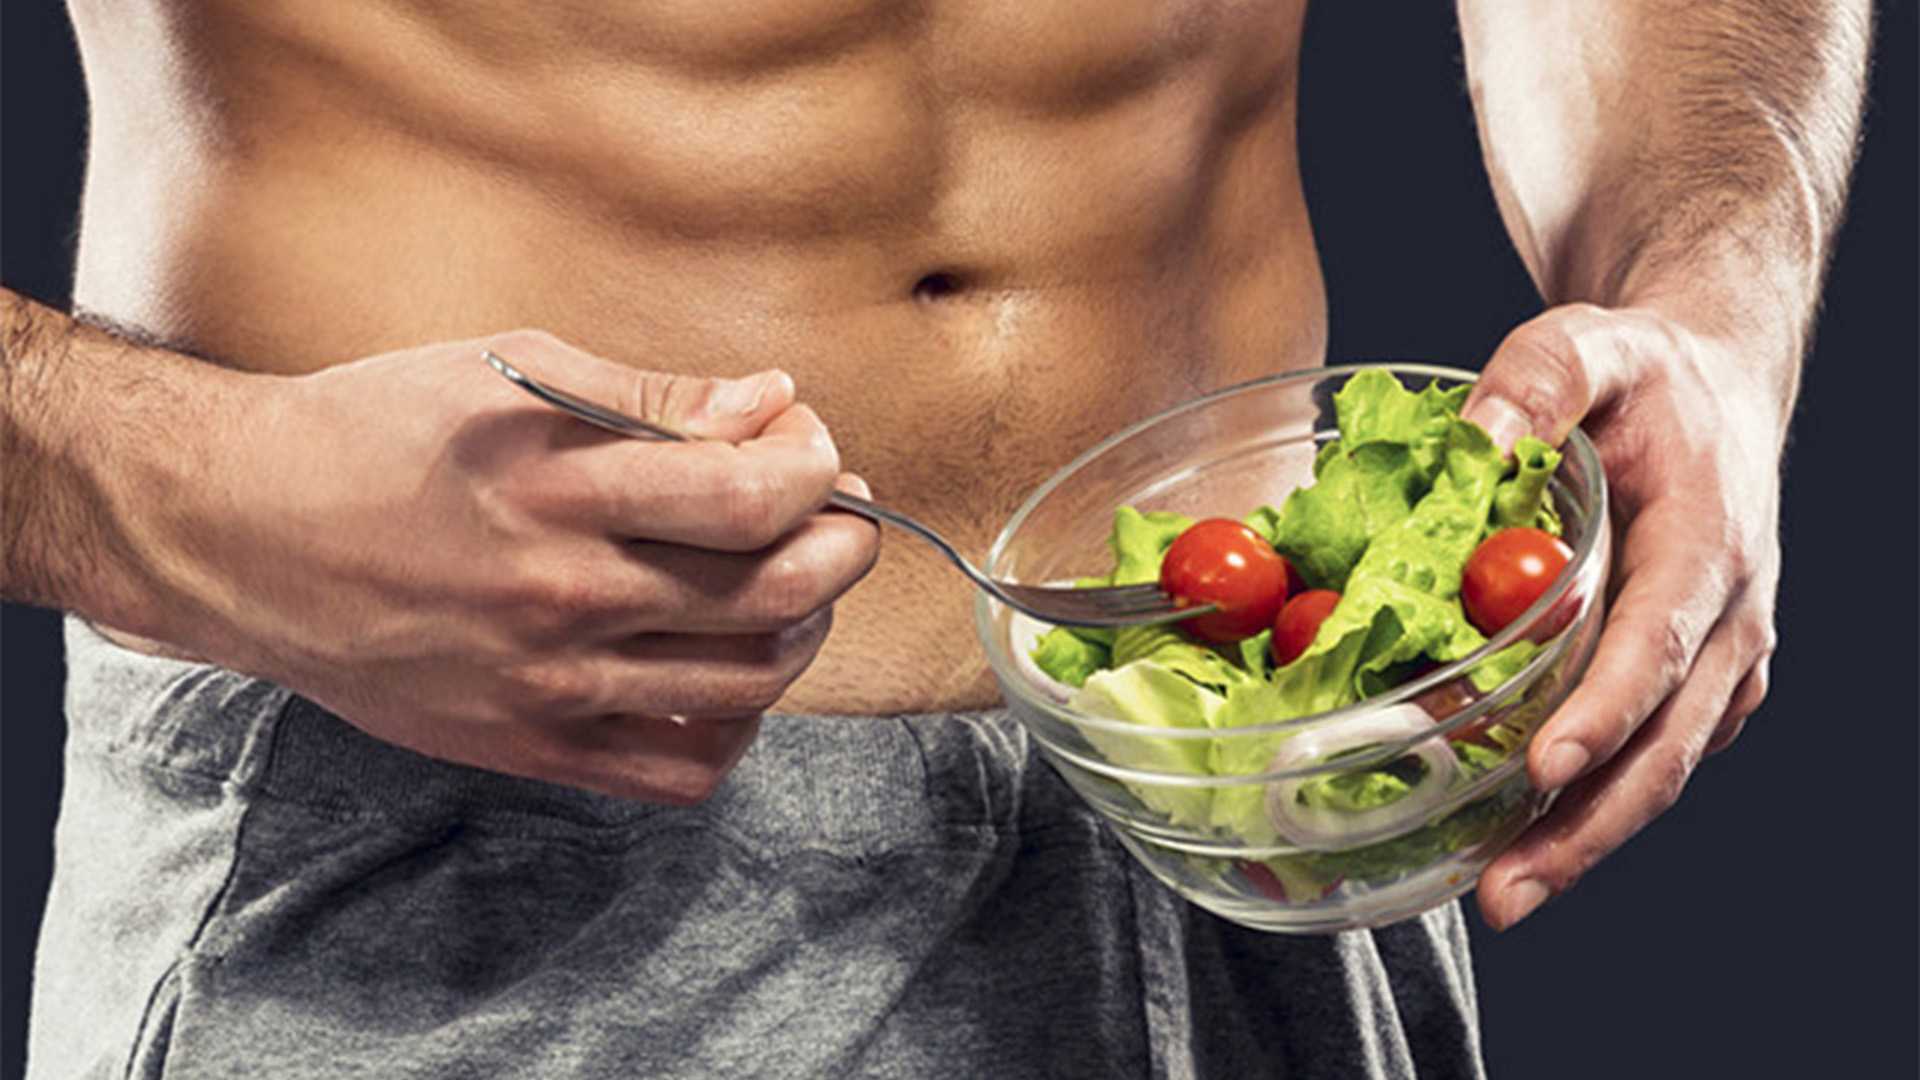 Food-intolerance-eat-healthy-fitness-guy-with-abs-salad